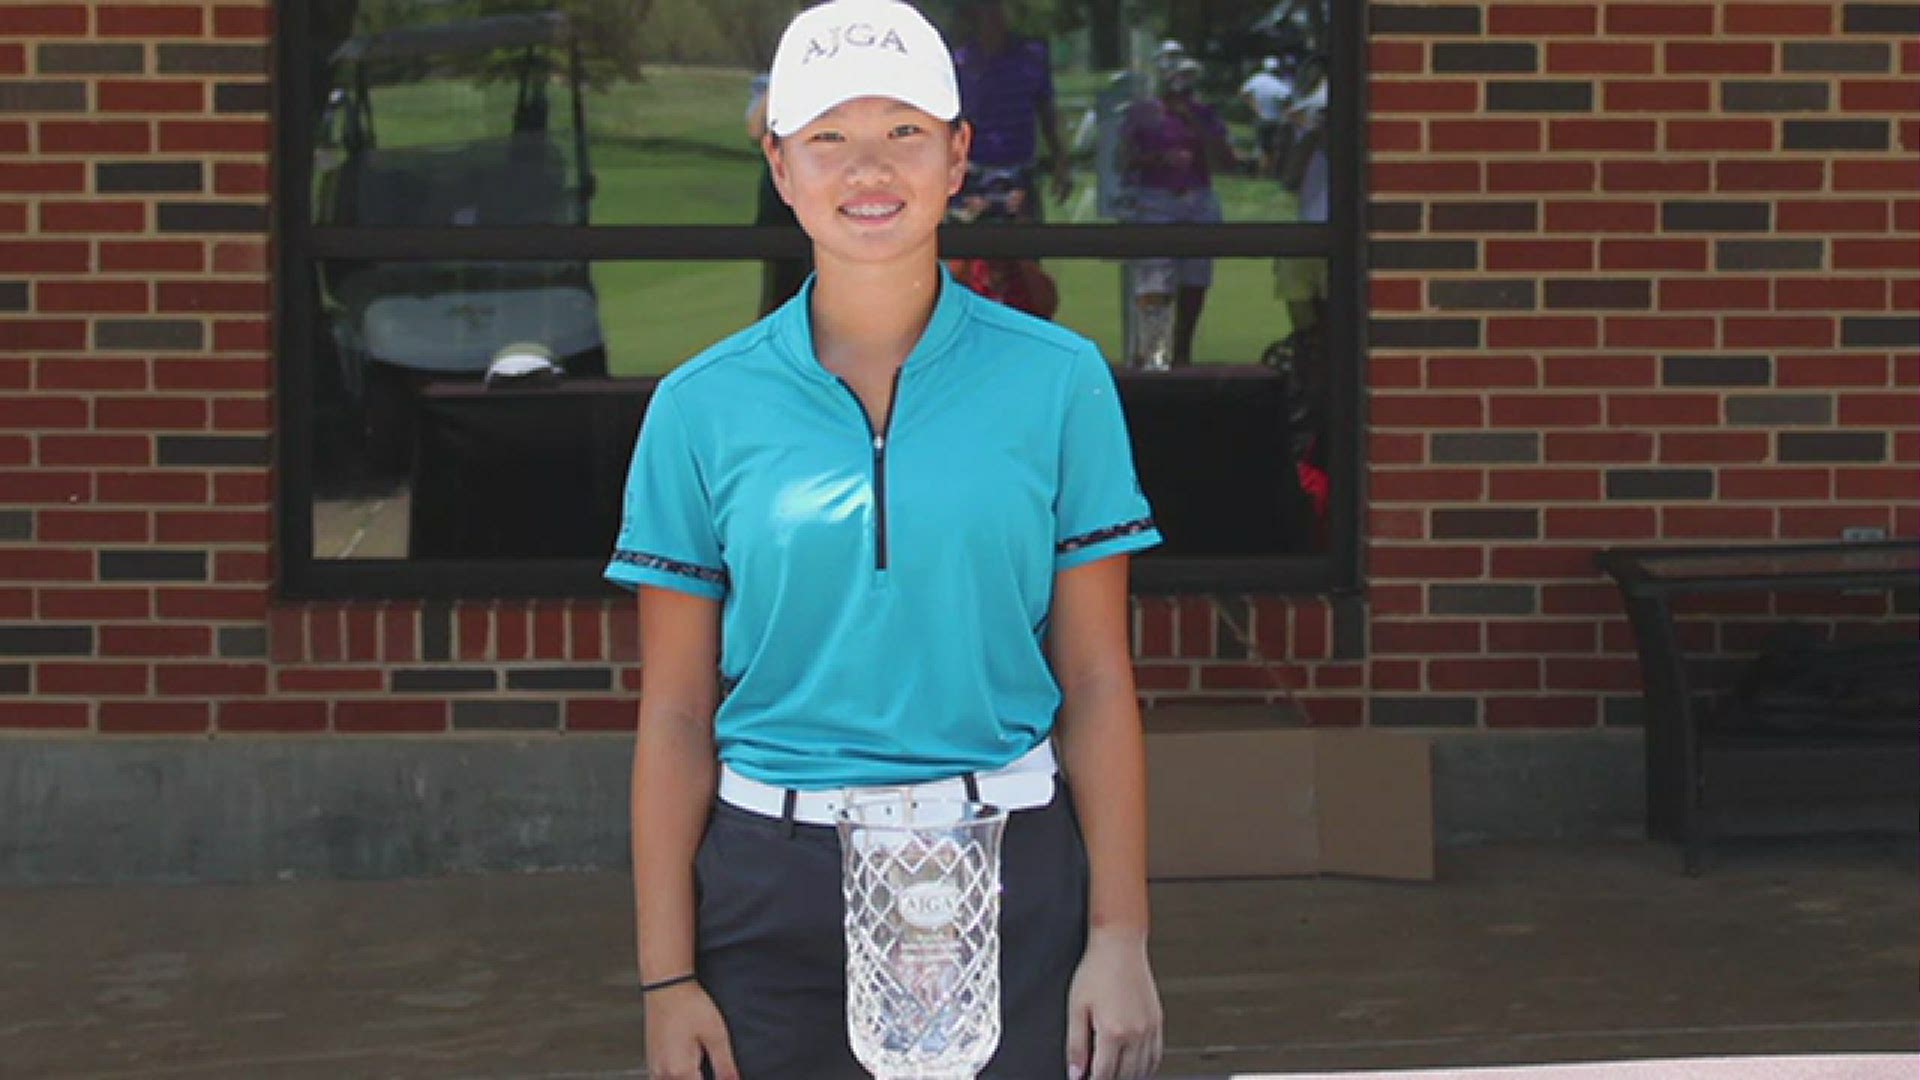 Lee has now won back-to-back AJGA tournaments as is ranked 9th nationally in the girls junior rankings